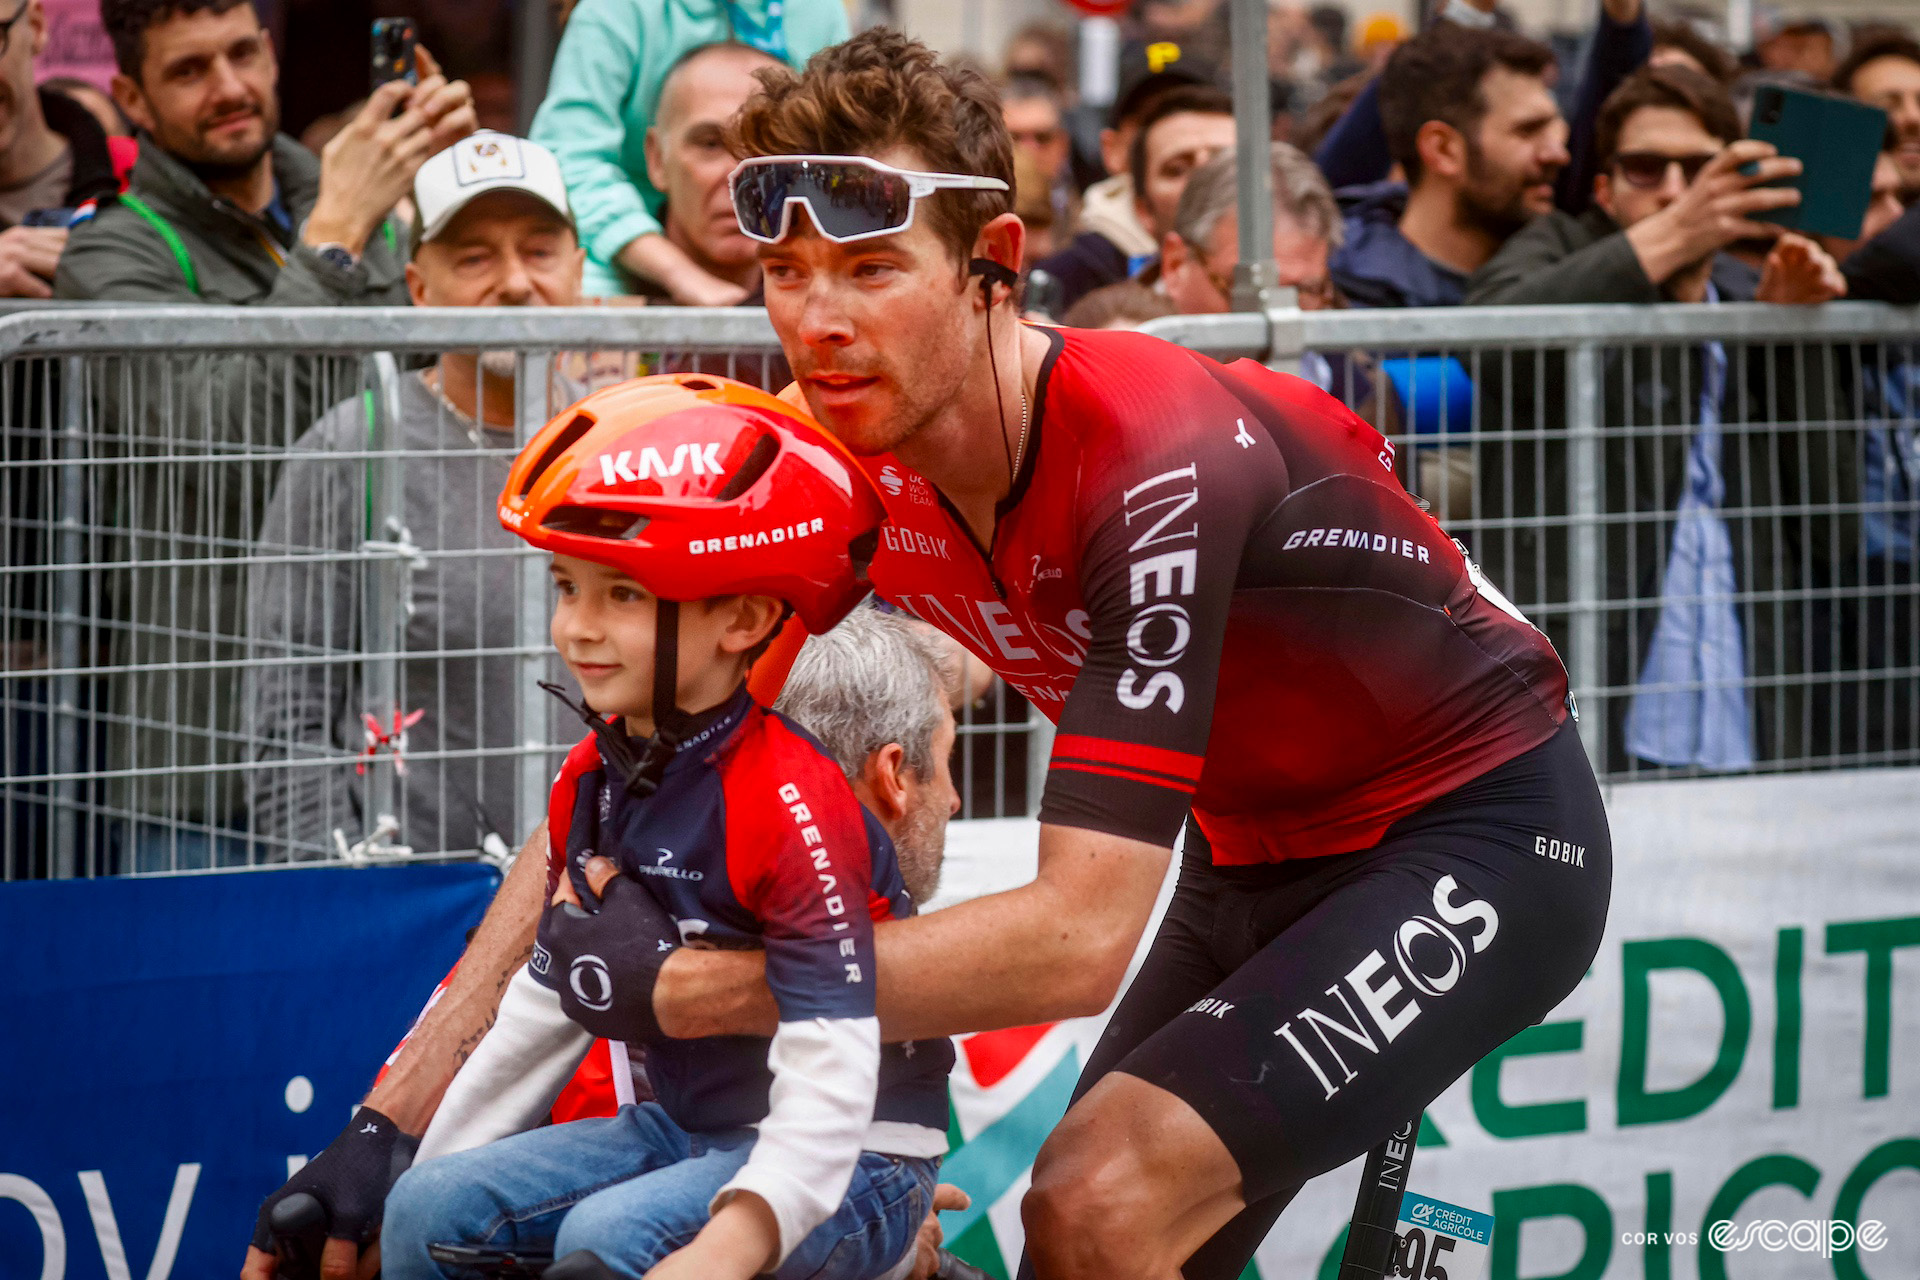 Luke Rowe with his young son perched on his handlebars in his helmet after the finish of Milan-San Remo 2024.